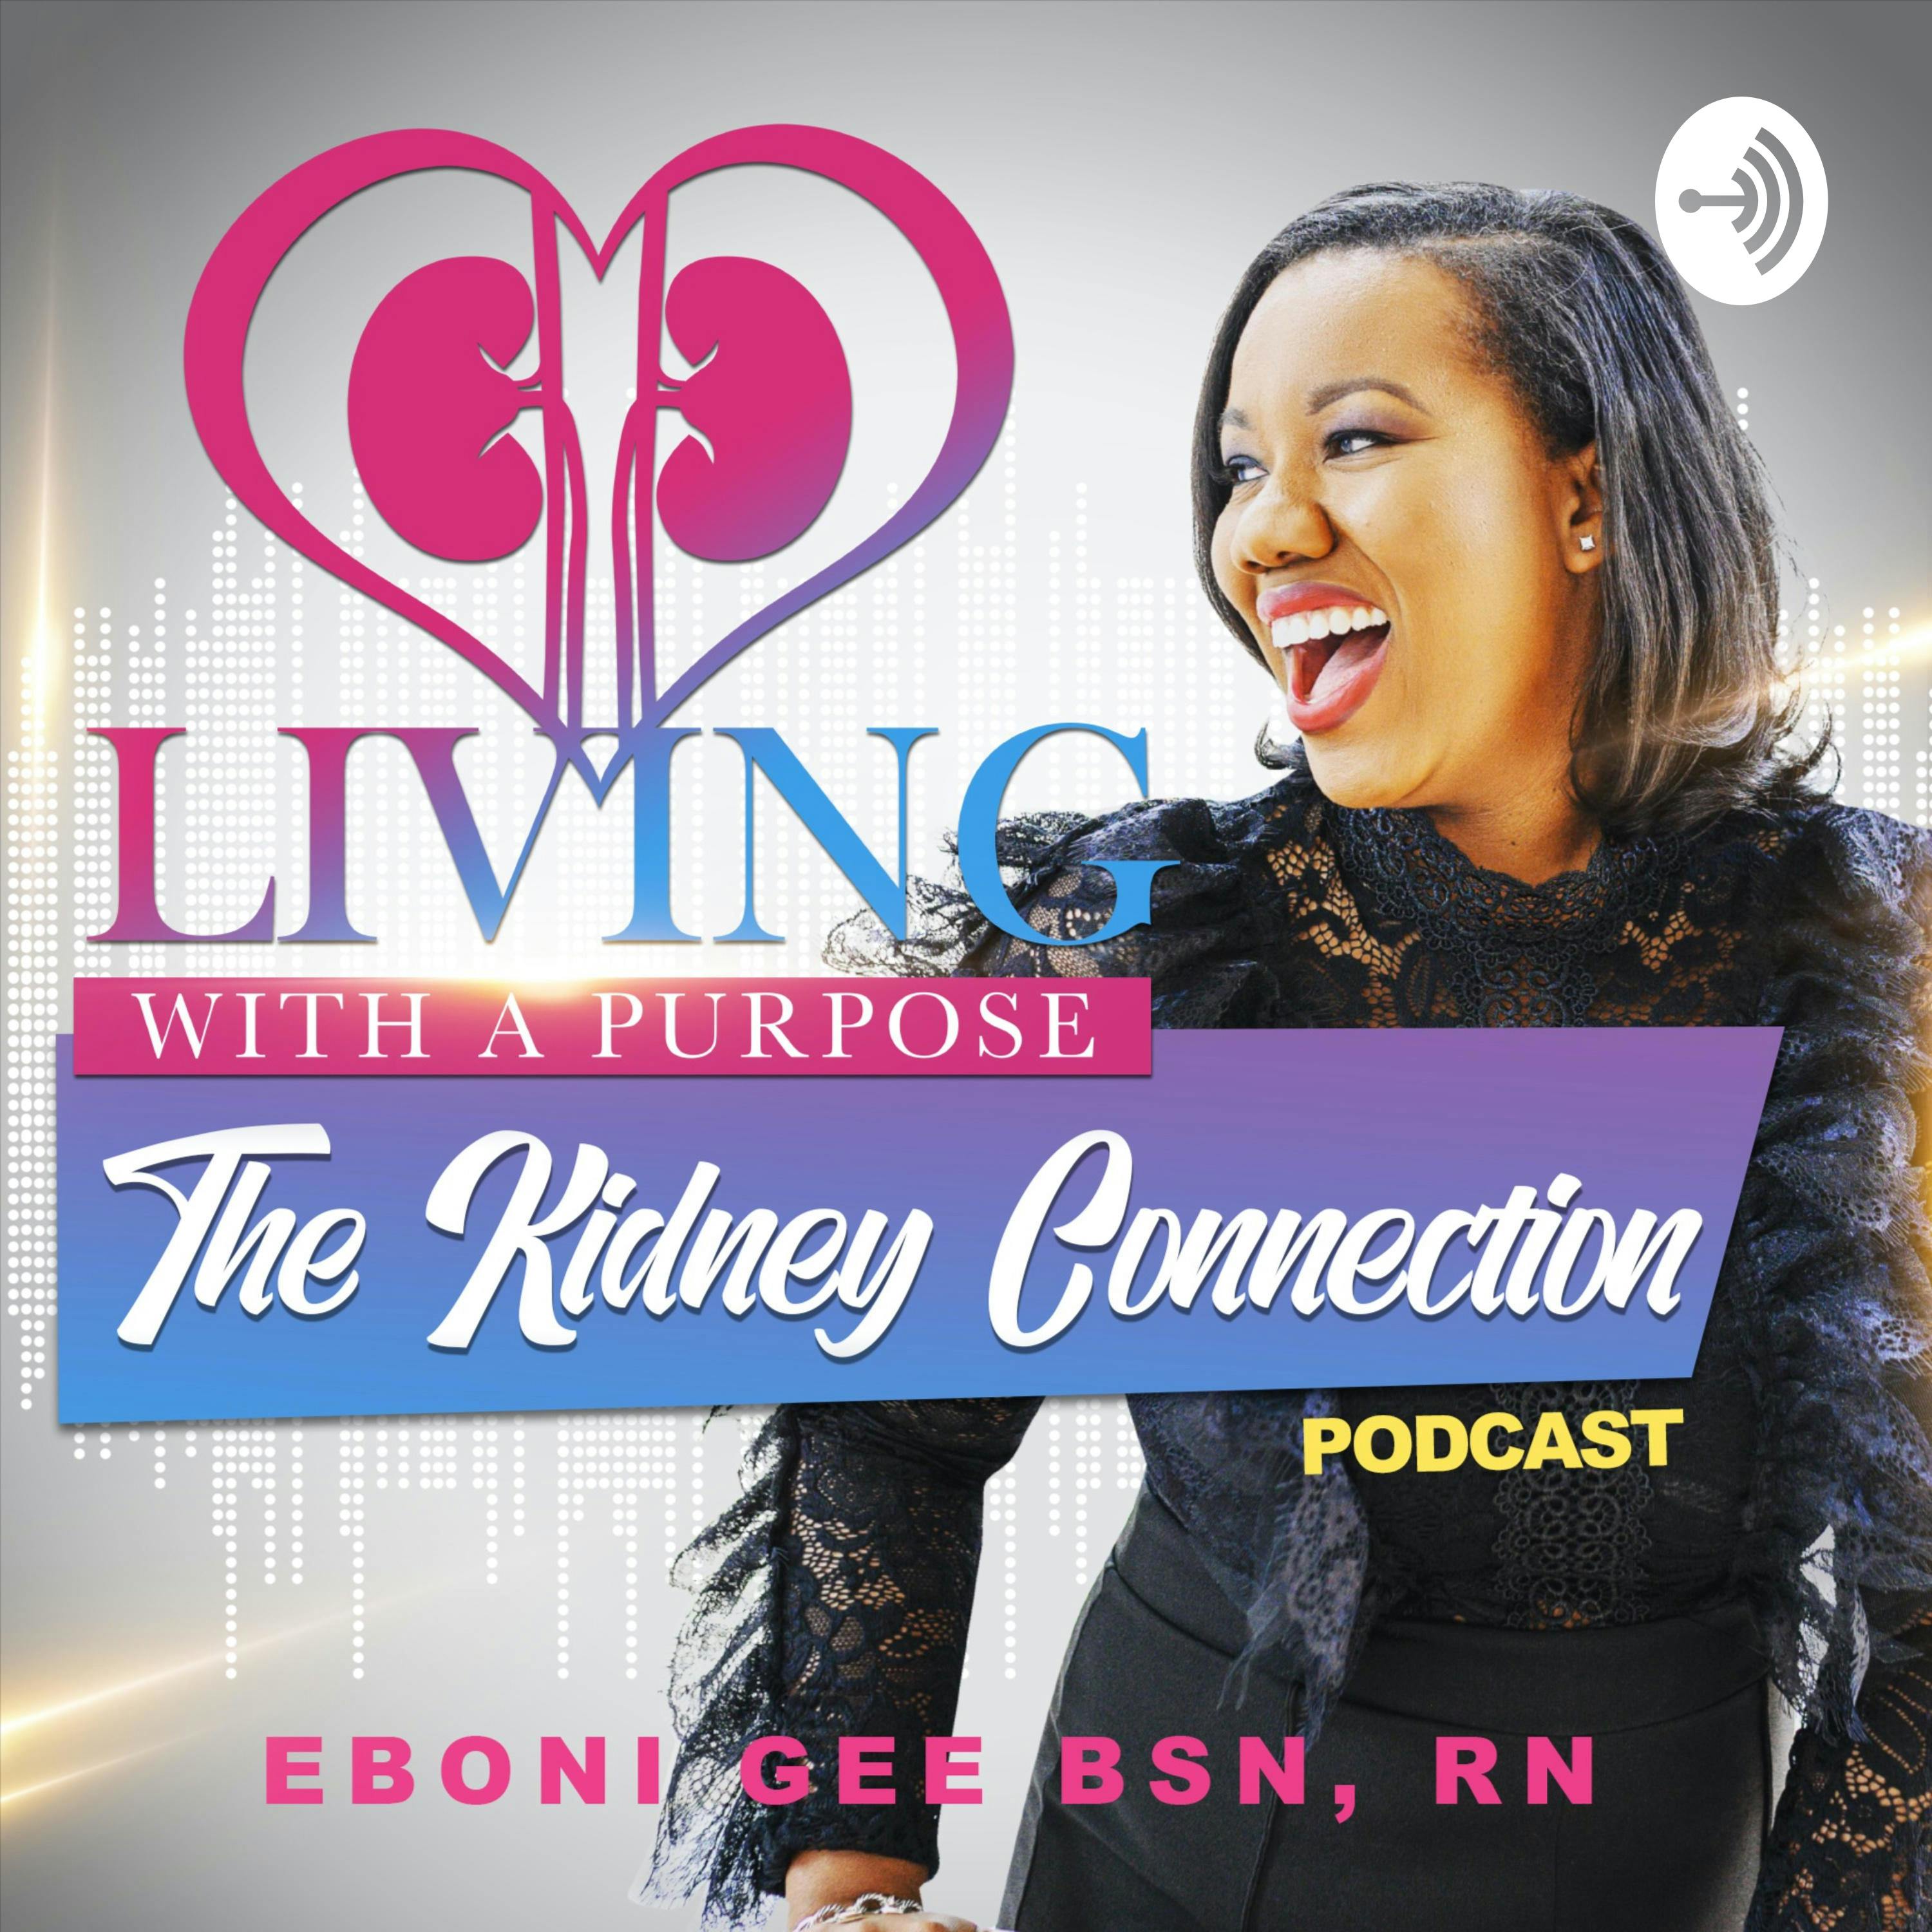 Listen To You Body: Kidney Disease, Organ Donation and Wellness with Rachelle McCray